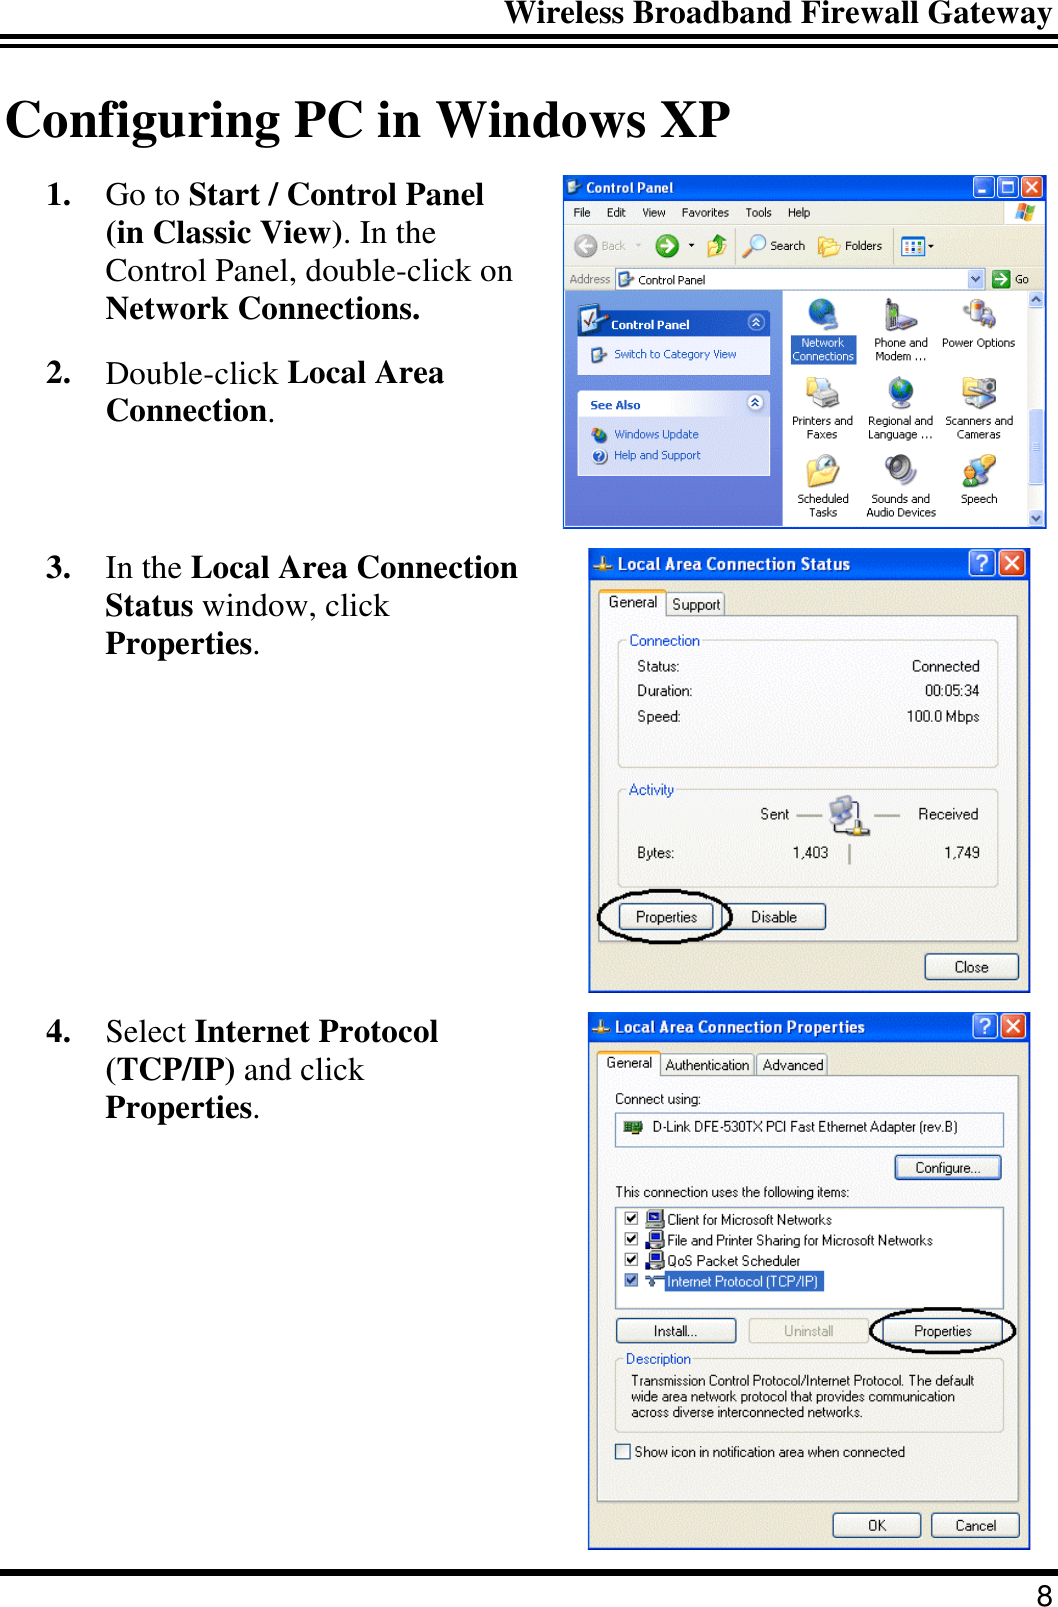 Wireless Broadband Firewall Gateway 8 Configuring PC in Windows XP 1.  Go to Start / Control Panel (in Classic View). In the Control Panel, double-click on Network Connections. 2.  Double-click Local Area Connection.  3.  In the Local Area Connection Status window, click Properties.  4.  Select Internet Protocol (TCP/IP) and click Properties.  